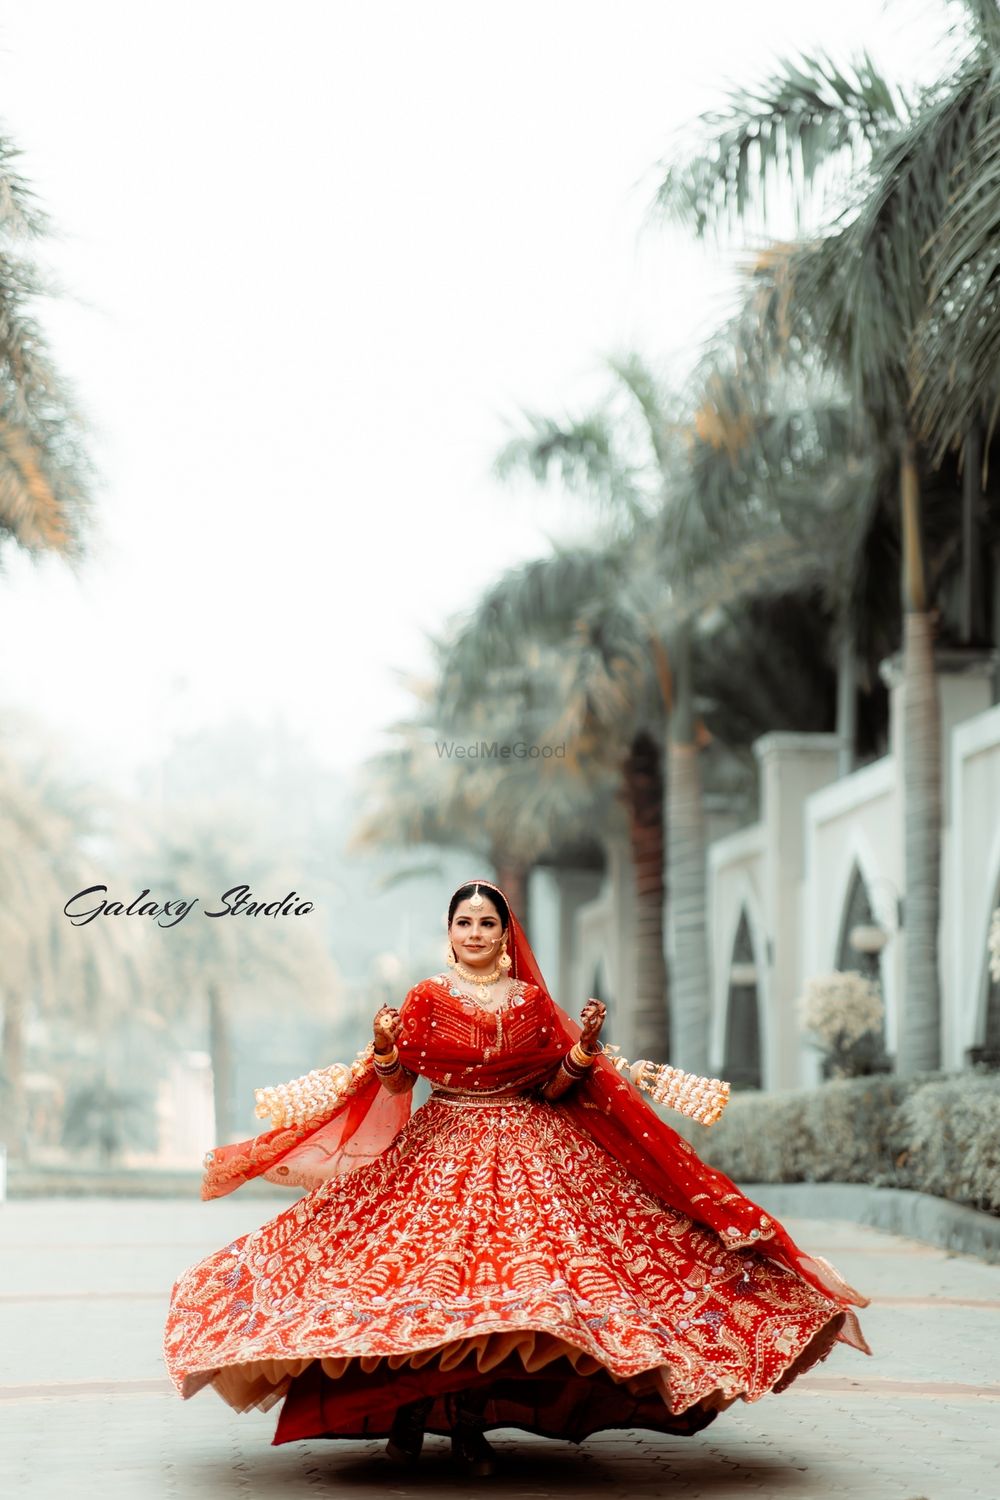 Photo From BEAUTIFUL BRIDE - By Official Galaxy Studio